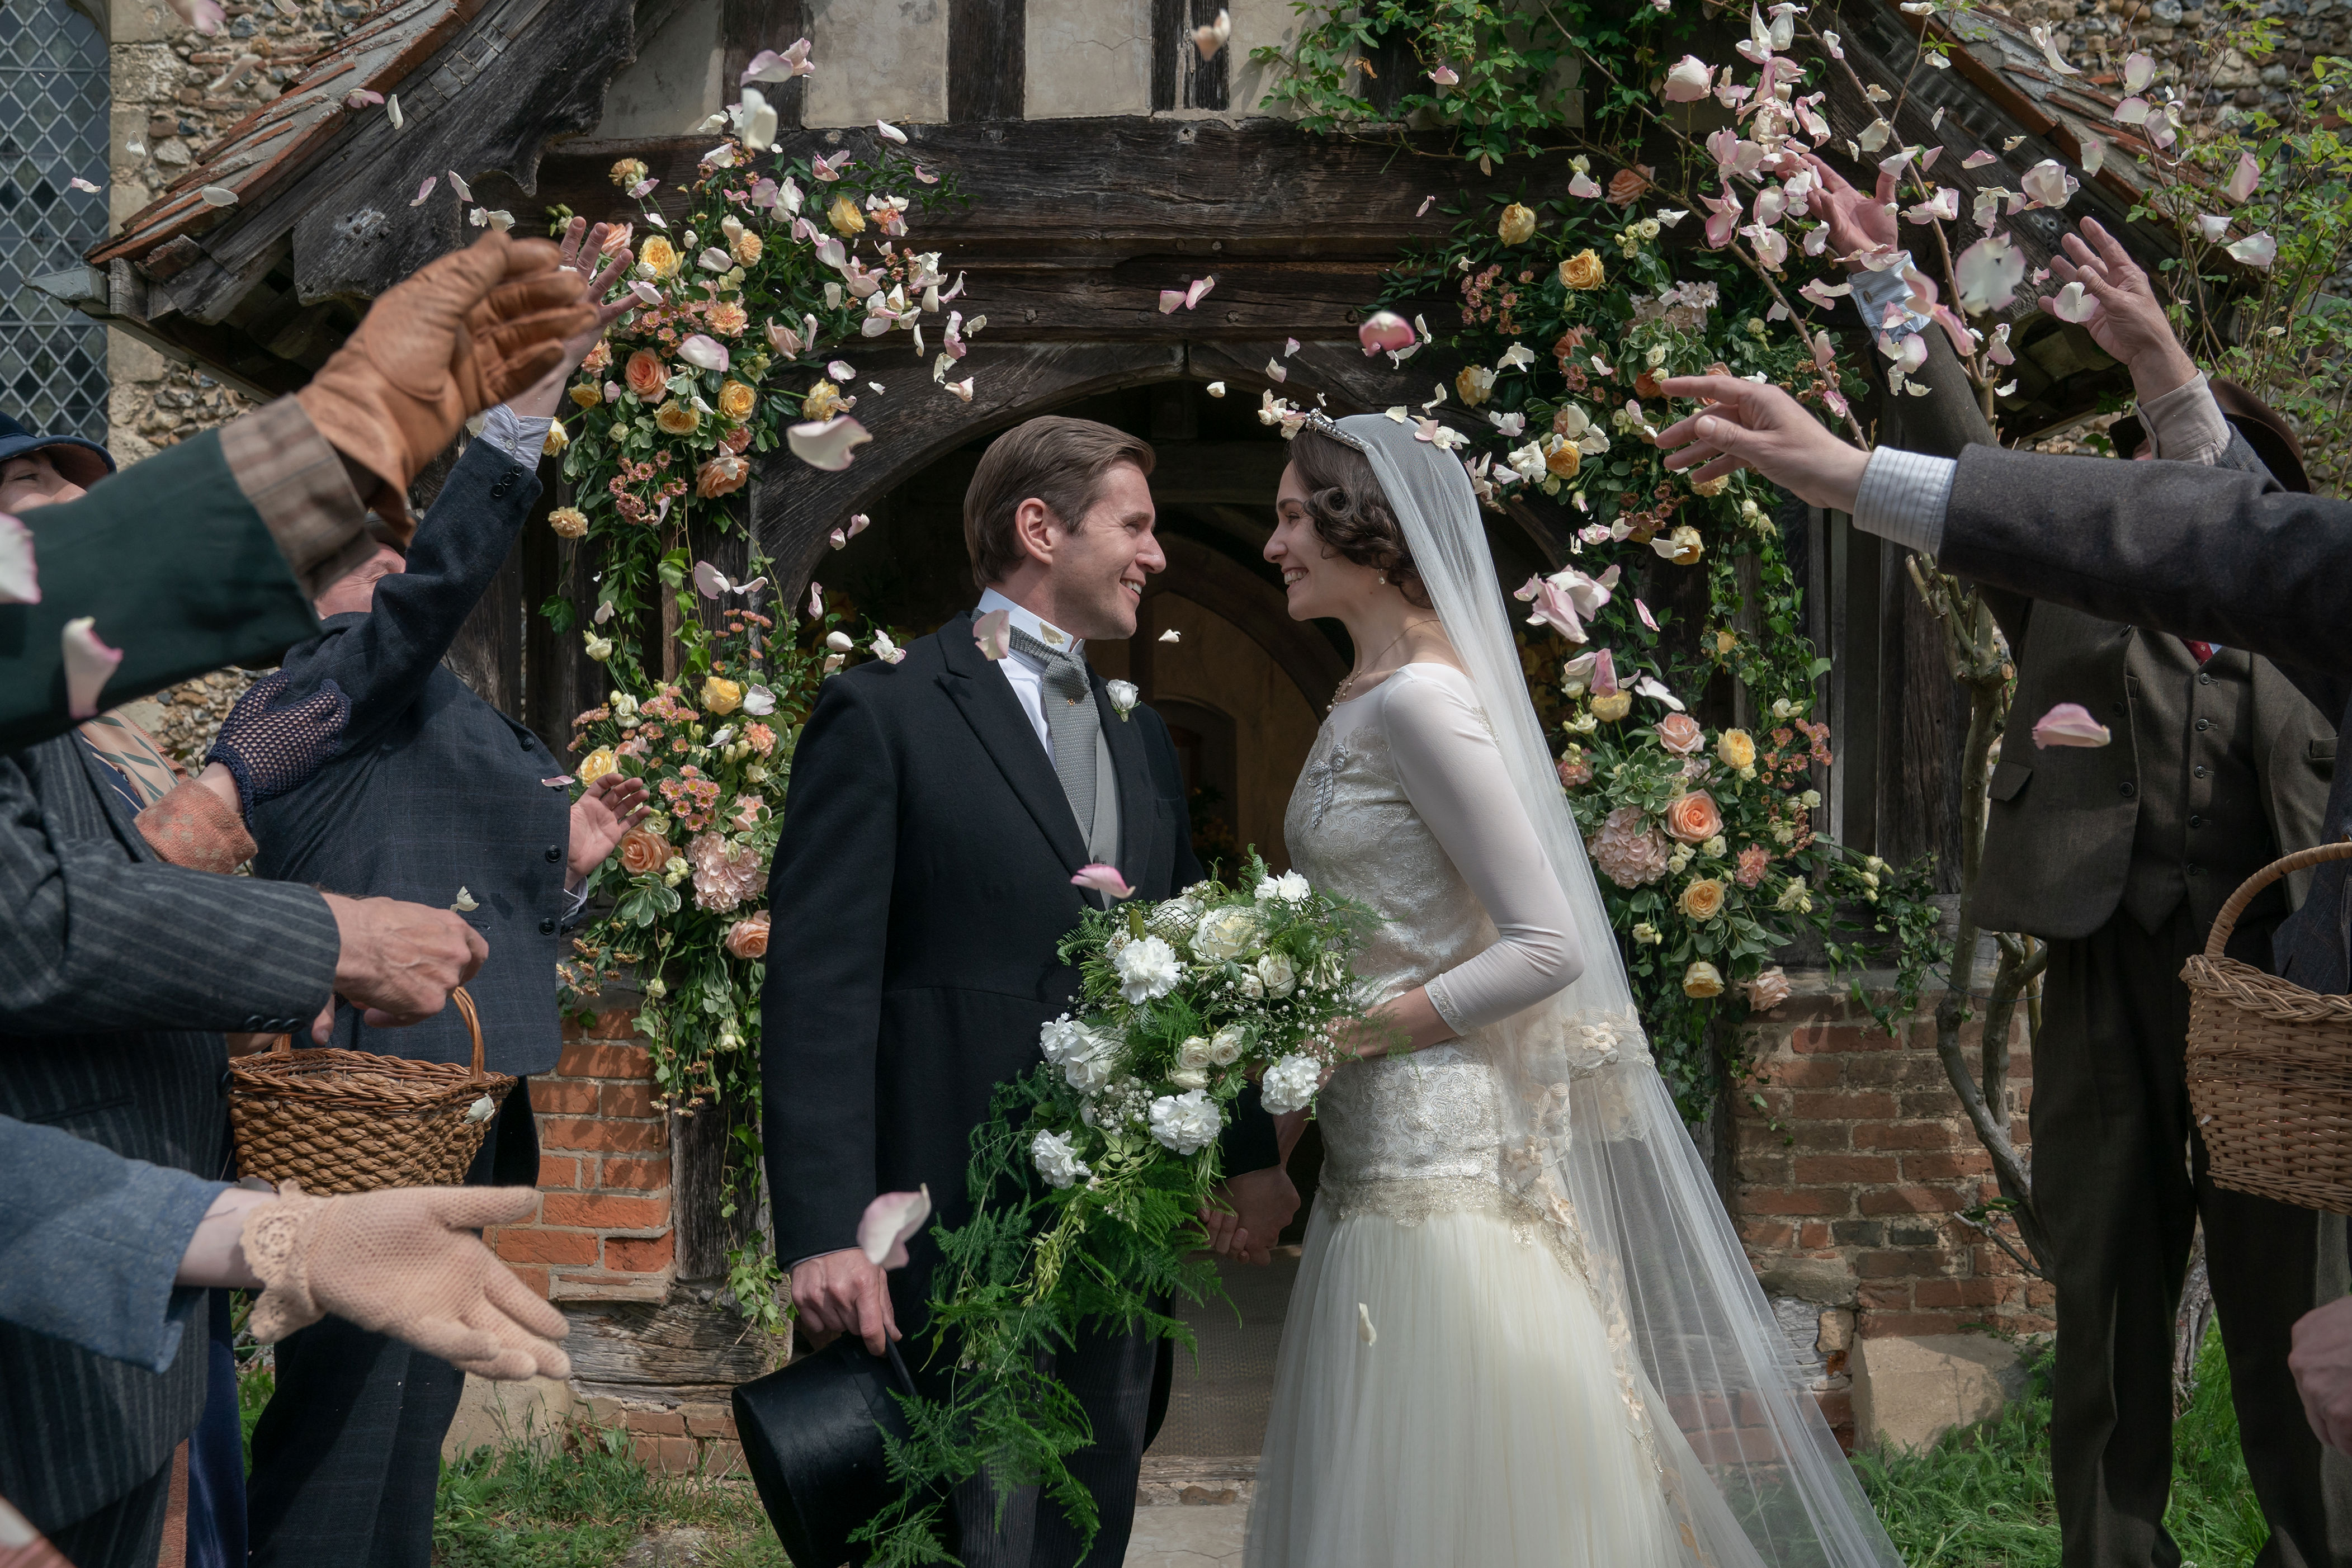 <p>Allen Leech donned a morning suit as his character, Tom Branson, wed Tuppence Middleton's Lucy Smith -- who wore a beautiful drop-waist wedding gown -- in the 1928-set 2022 film "Downton Abbey: A New Era."</p>